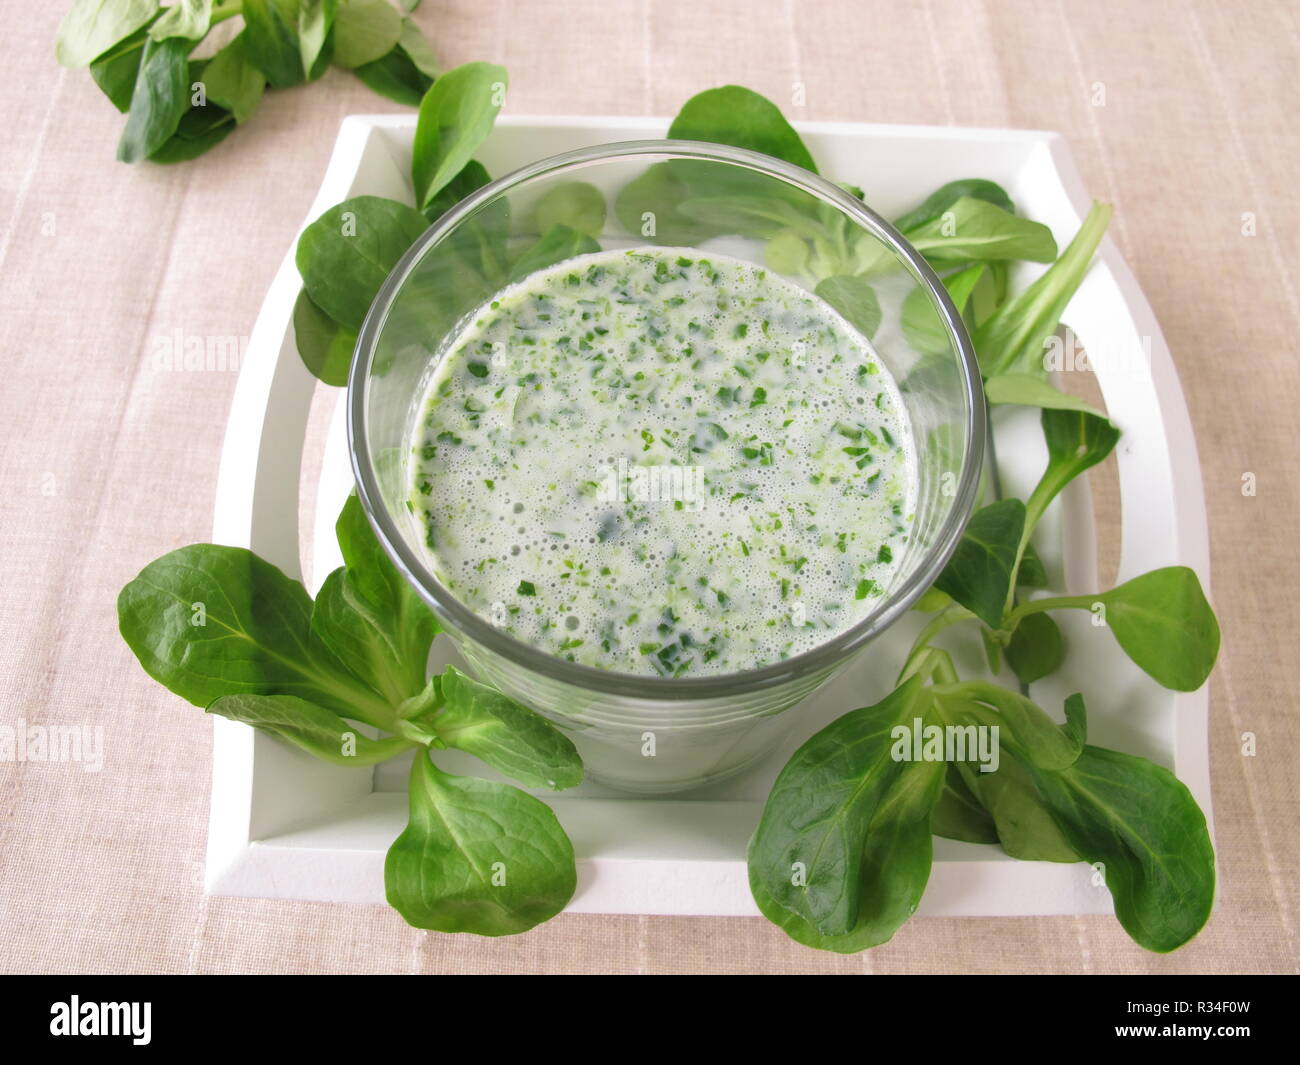 green smoothie with corn salad Stock Photo